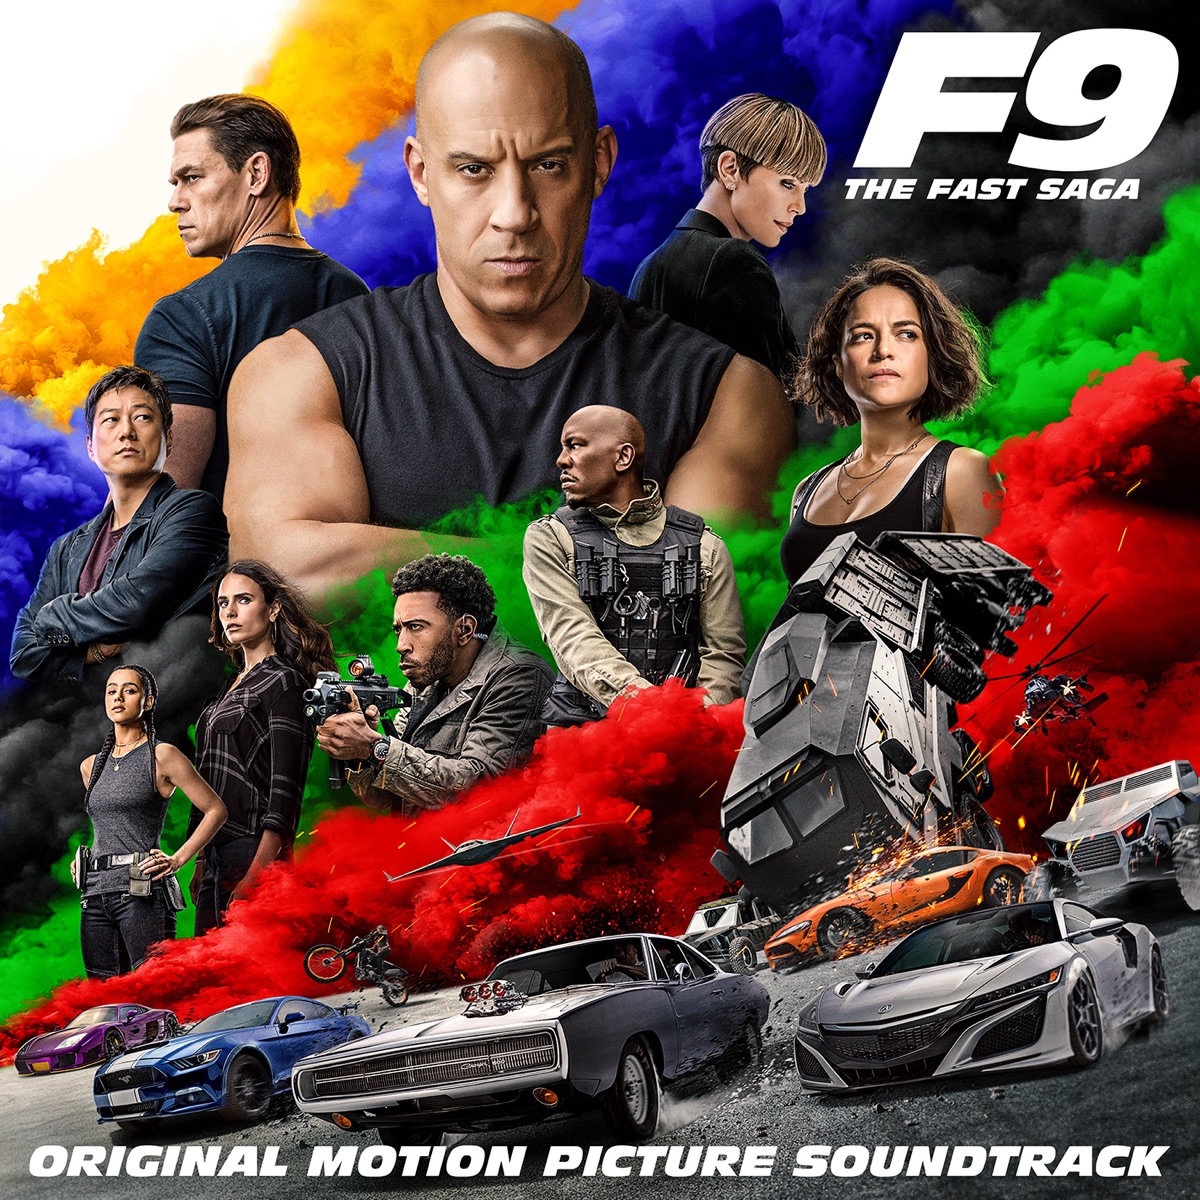 Cover art for『Don Toliver, Lil Durk & Latto - Fast Lane』from the release『F9: The Fast Saga (Original Motion Picture Soundtrack)